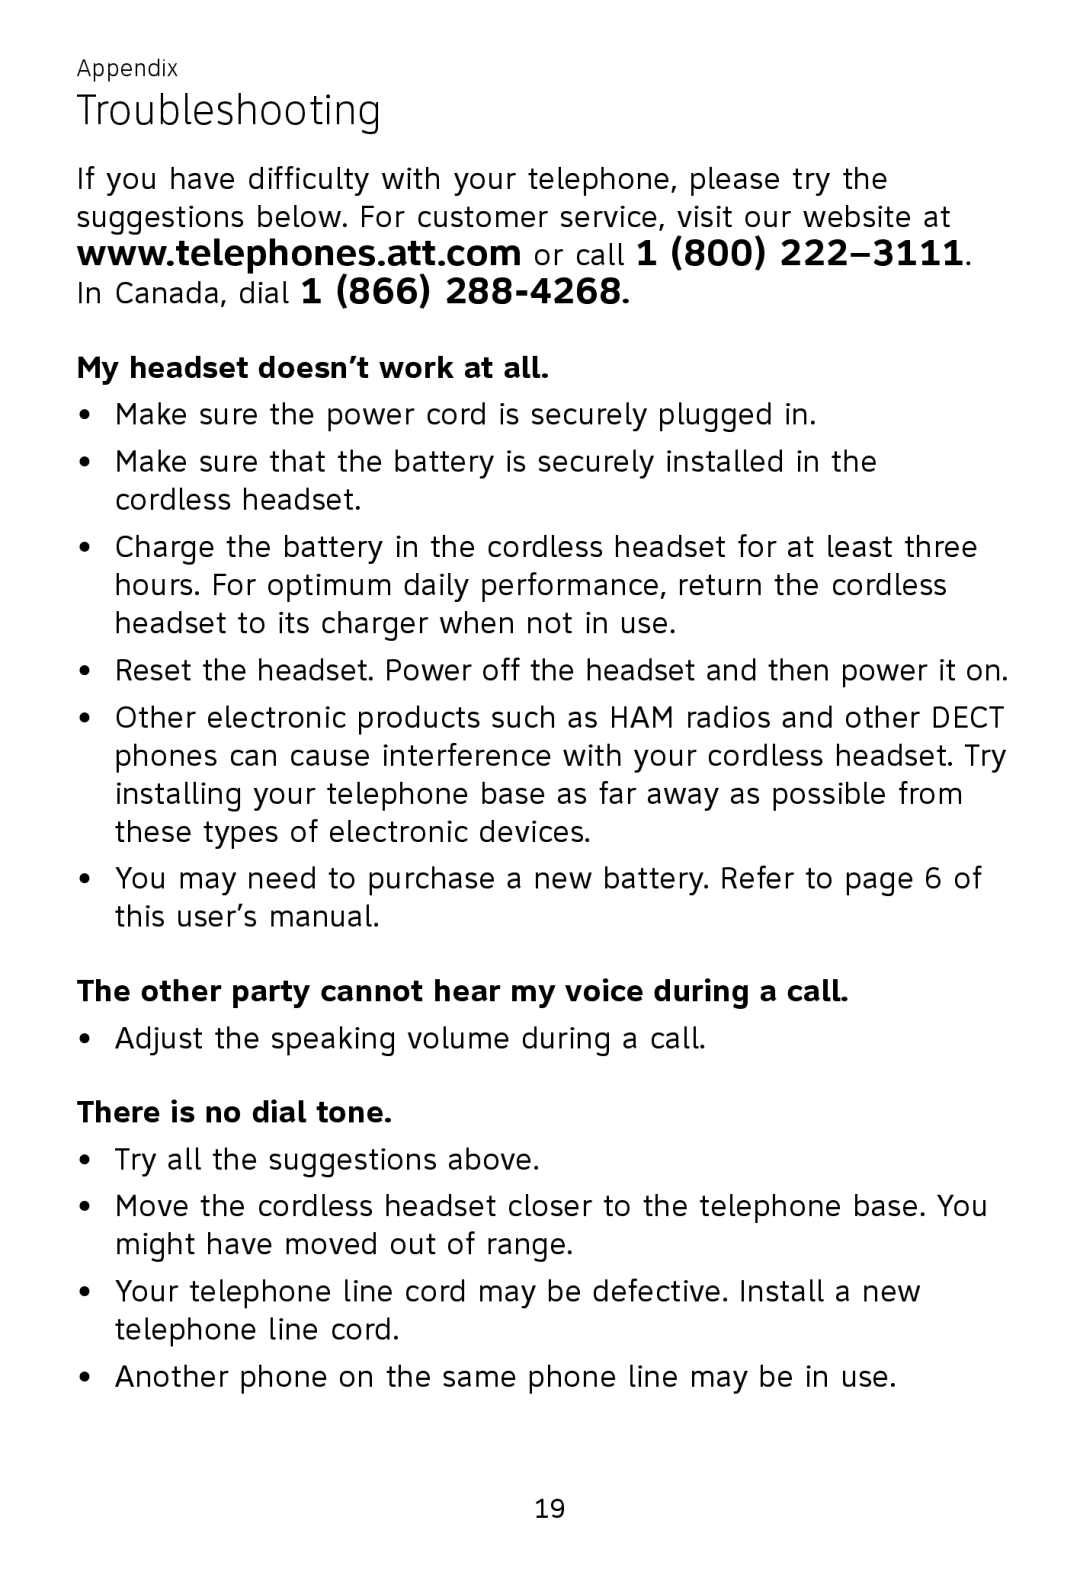 AT&T TL7700 user manual Troubleshooting, My headset doesn’t work at all, There is no dial tone 